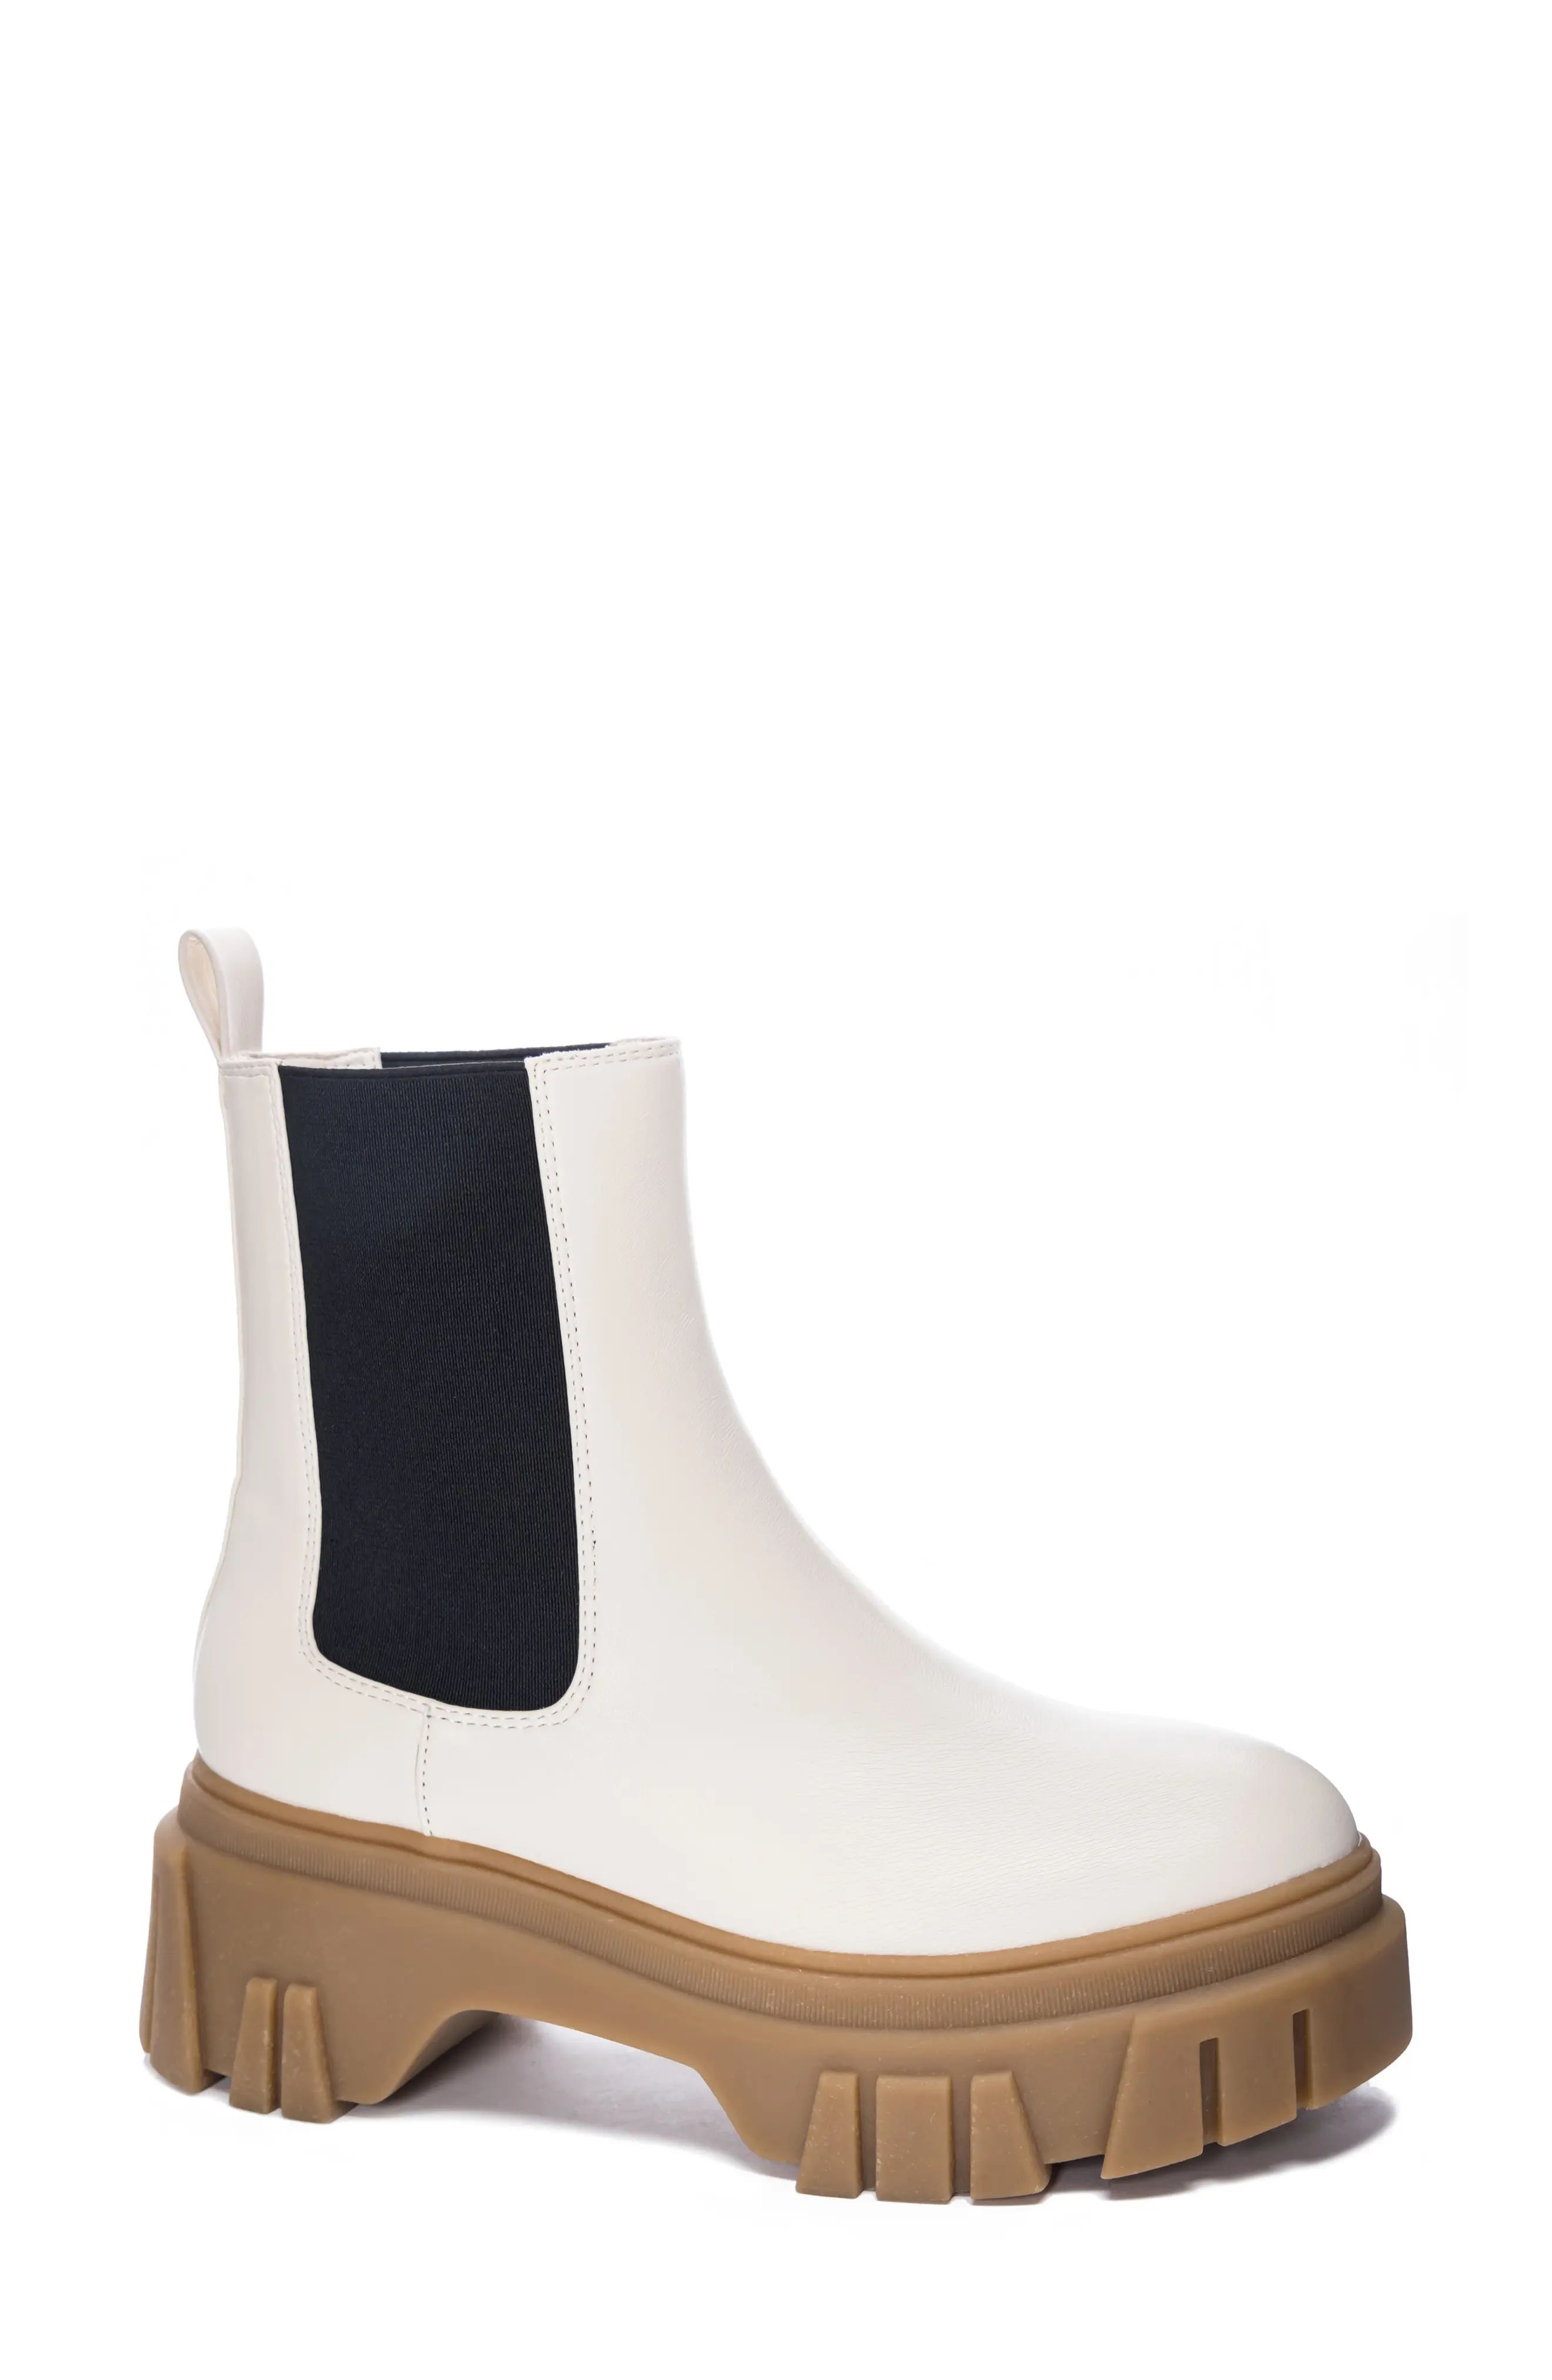 Chinese Laundry Jenny Platform Chelsea Boot, Size 8.5 in Cream Smooth at Nordstrom | Nordstrom